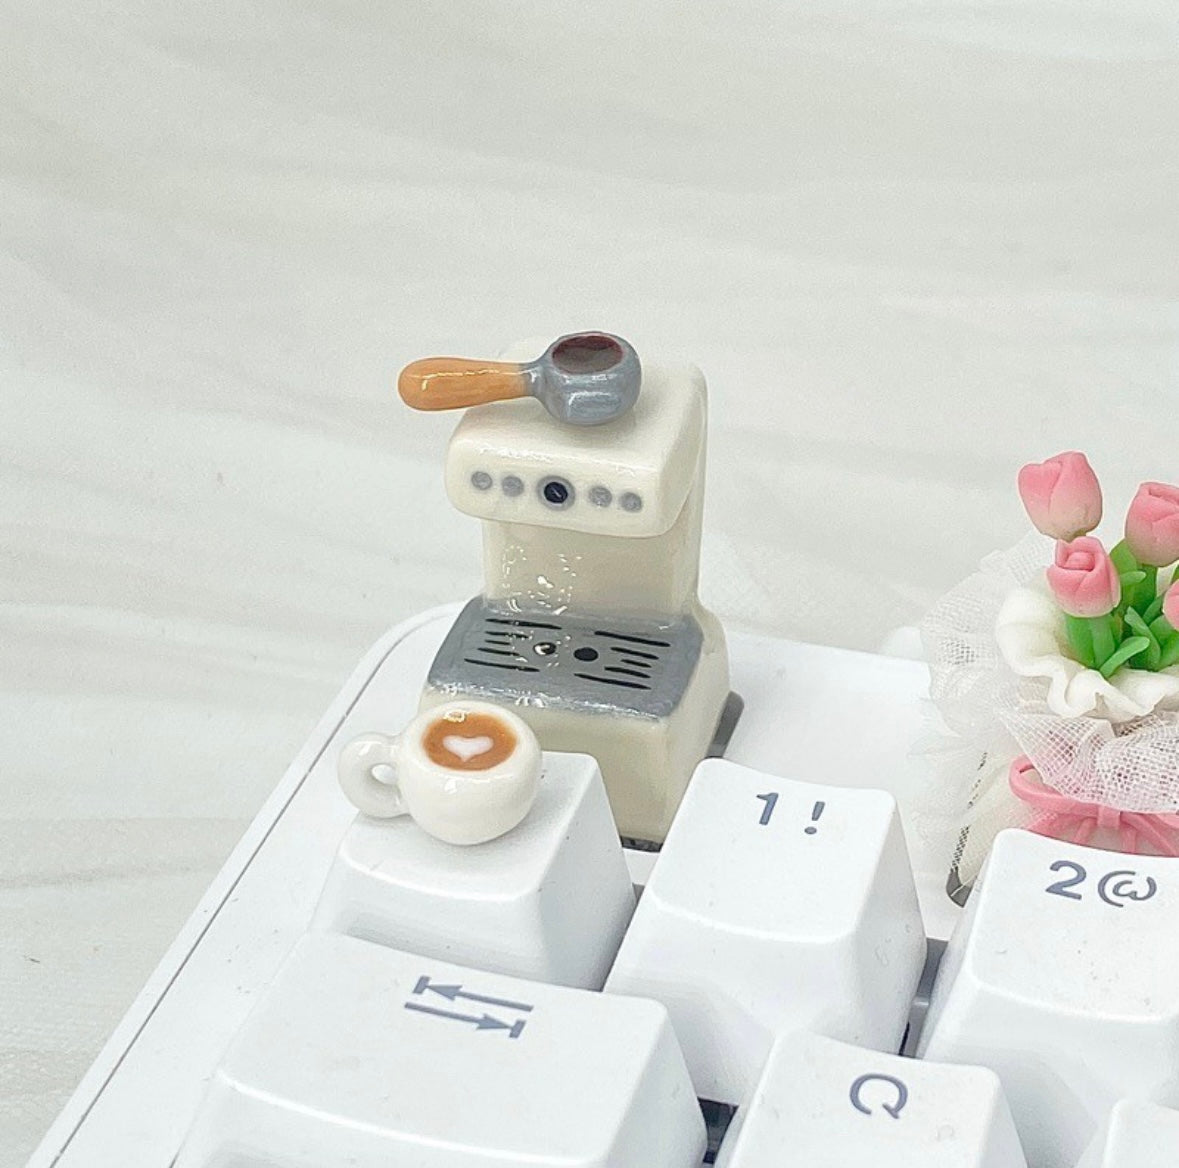 "Indulge in a coffee break with our 'Want a Cup of Coffee?' Custom Coffee Artisan Keycap. Handcrafted with care, this keycap features a steaming cup of coffee, perfect for coffee lovers. It's a charming addition to your keyboard, inviting you to savor every keystroke with a hint of caffeine charm. Elevate your setup with this unique and delightful artisan keycap." ☕💻 #Keycaps #ArtisanKeycaps #CoffeeLovers